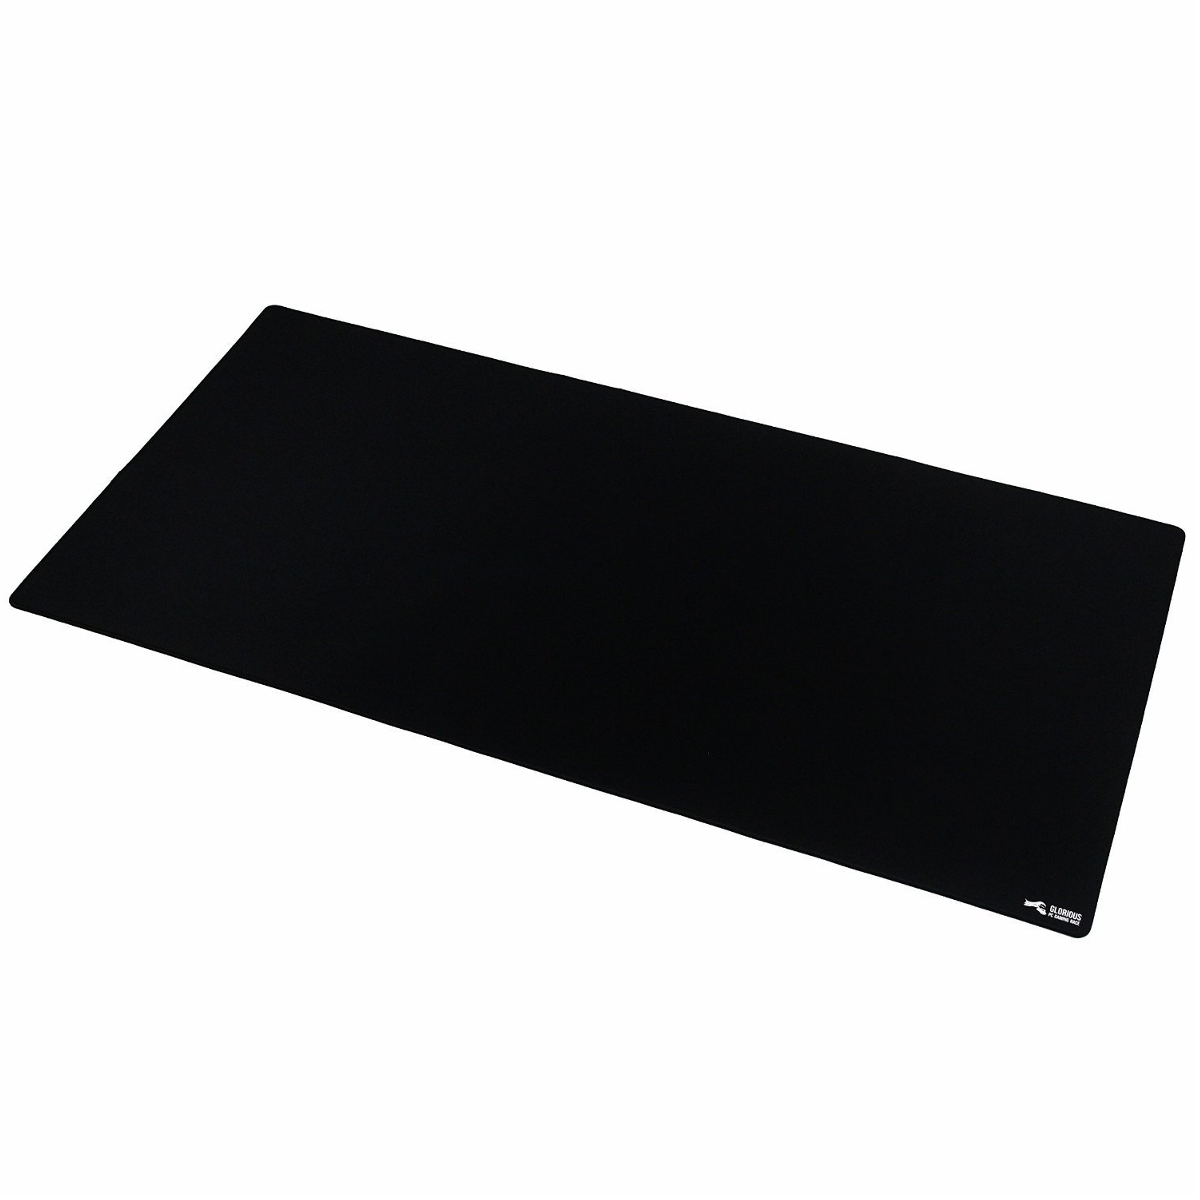 Glorious - Glorious G-3XL Extended Gaming Mouse Mat - Black 1220x610x3mm